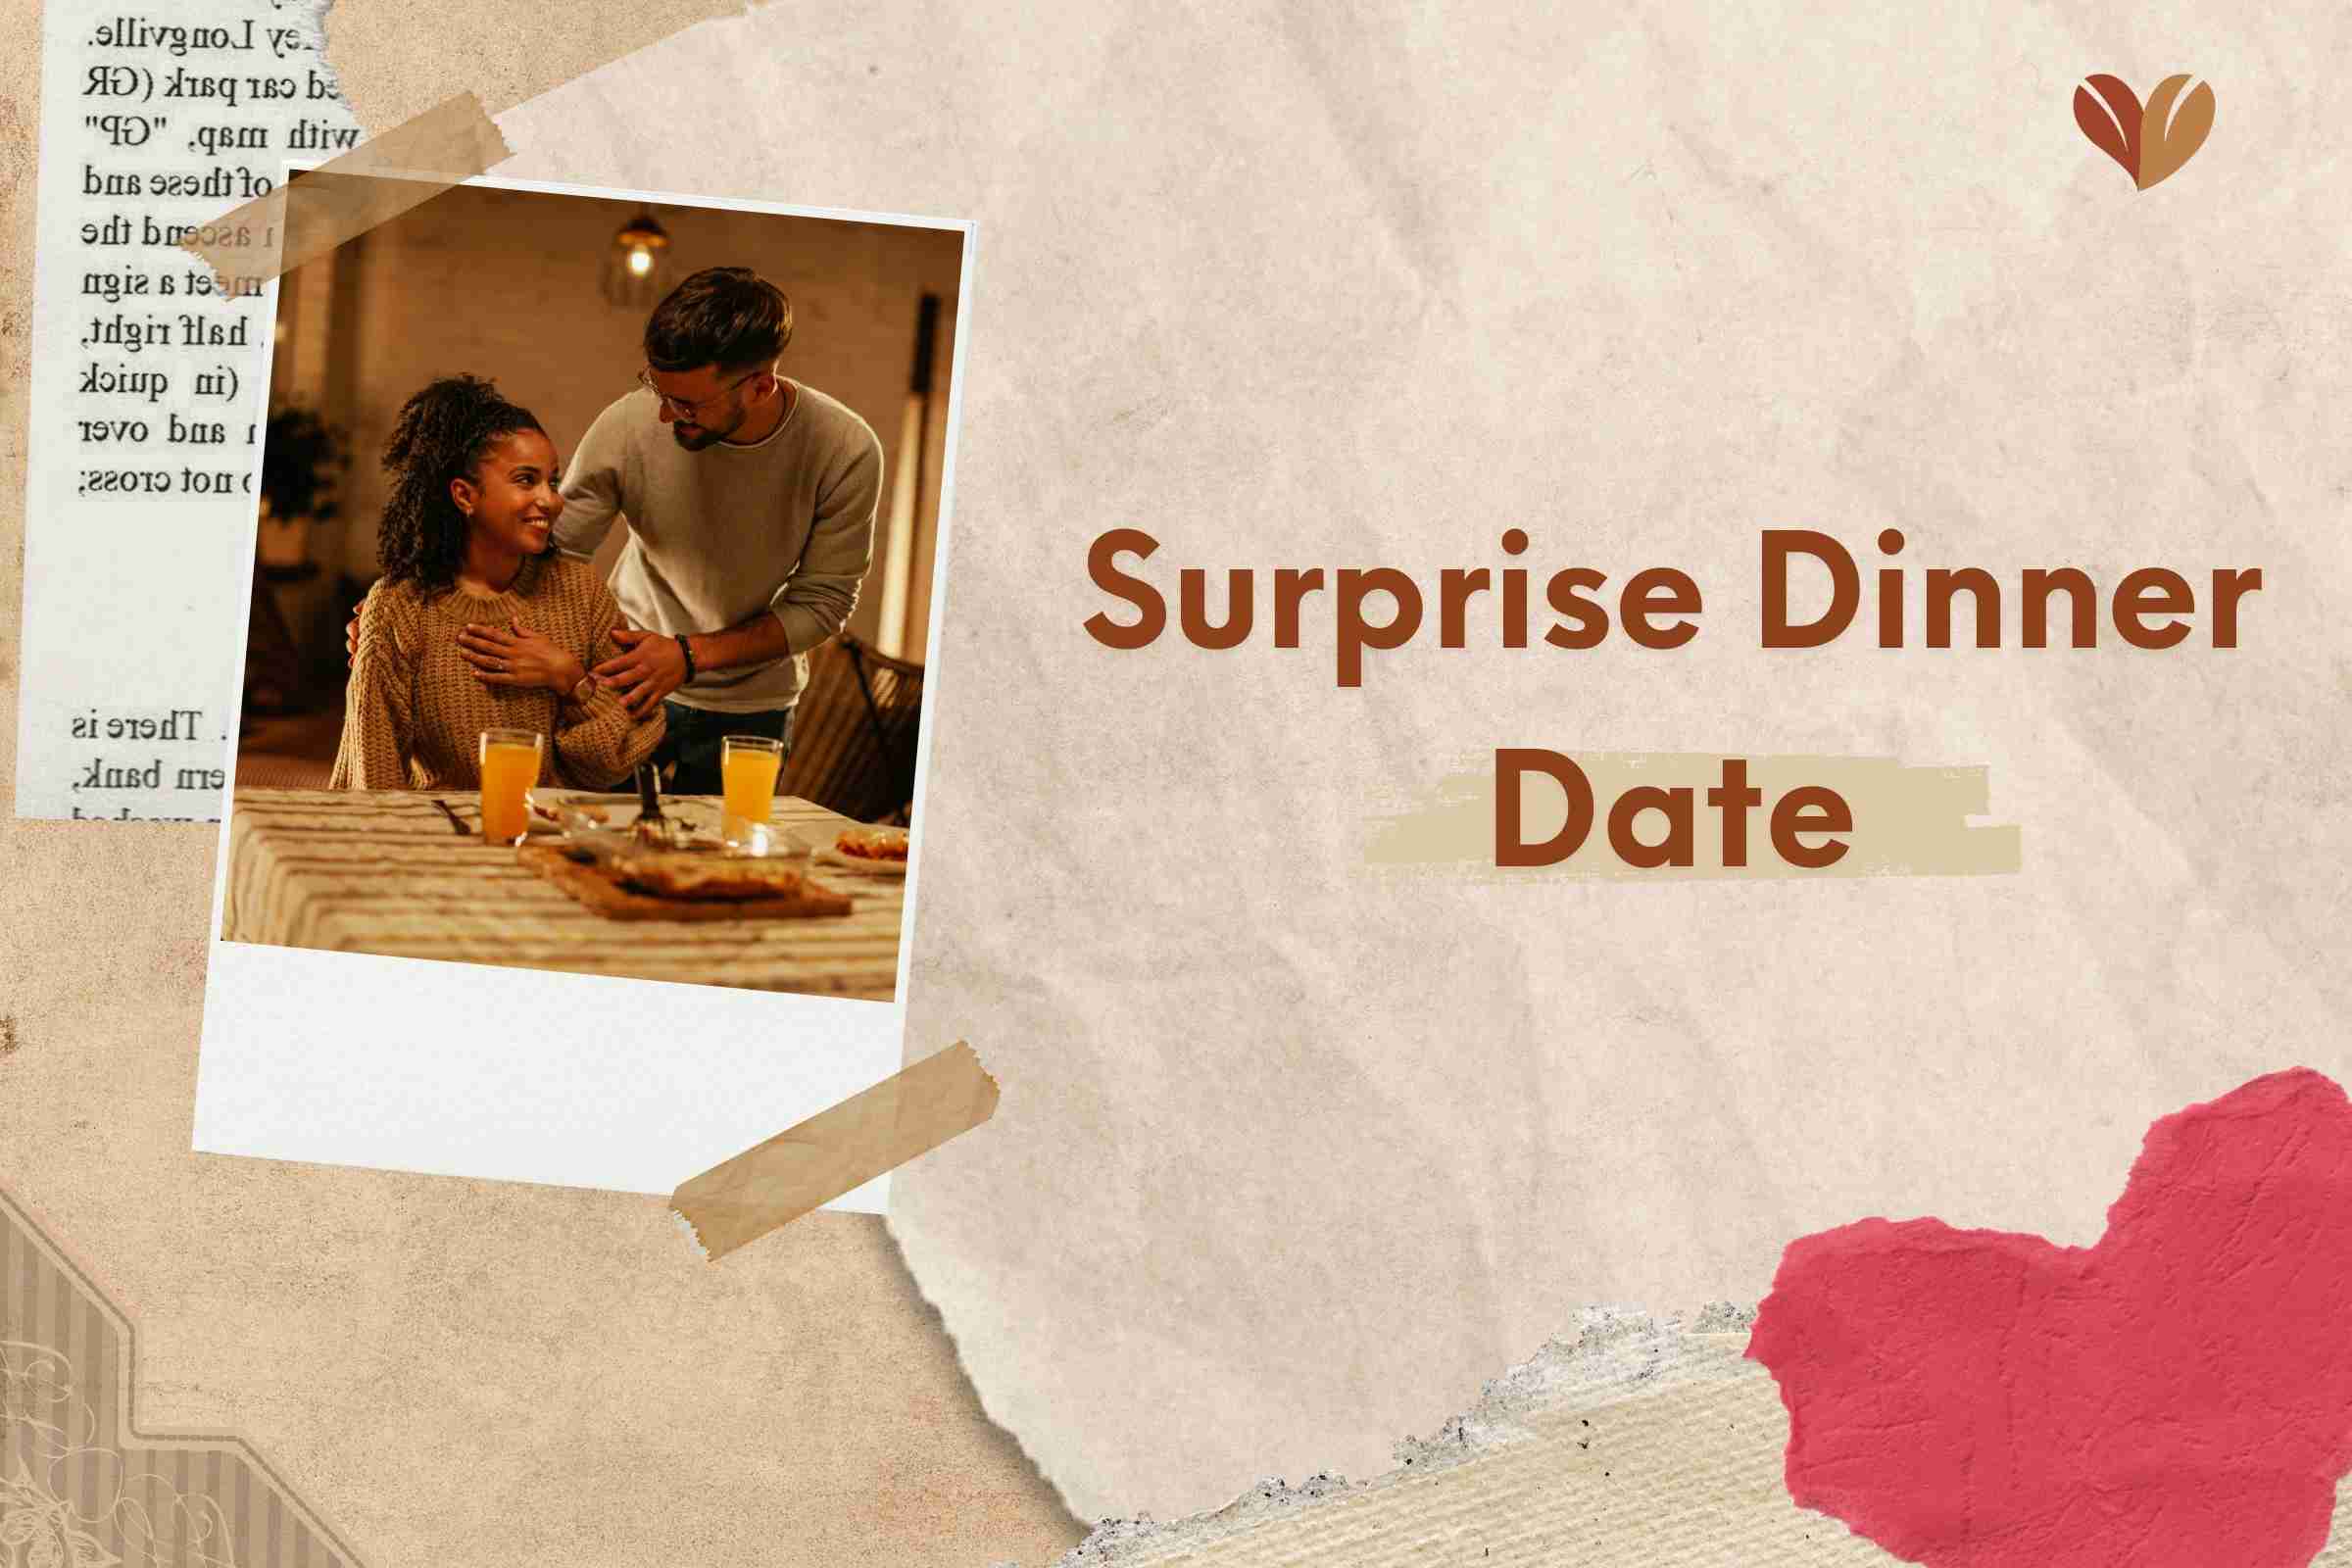 Pay attention to her favorite dishes or cuisines when planning the dinner menu.